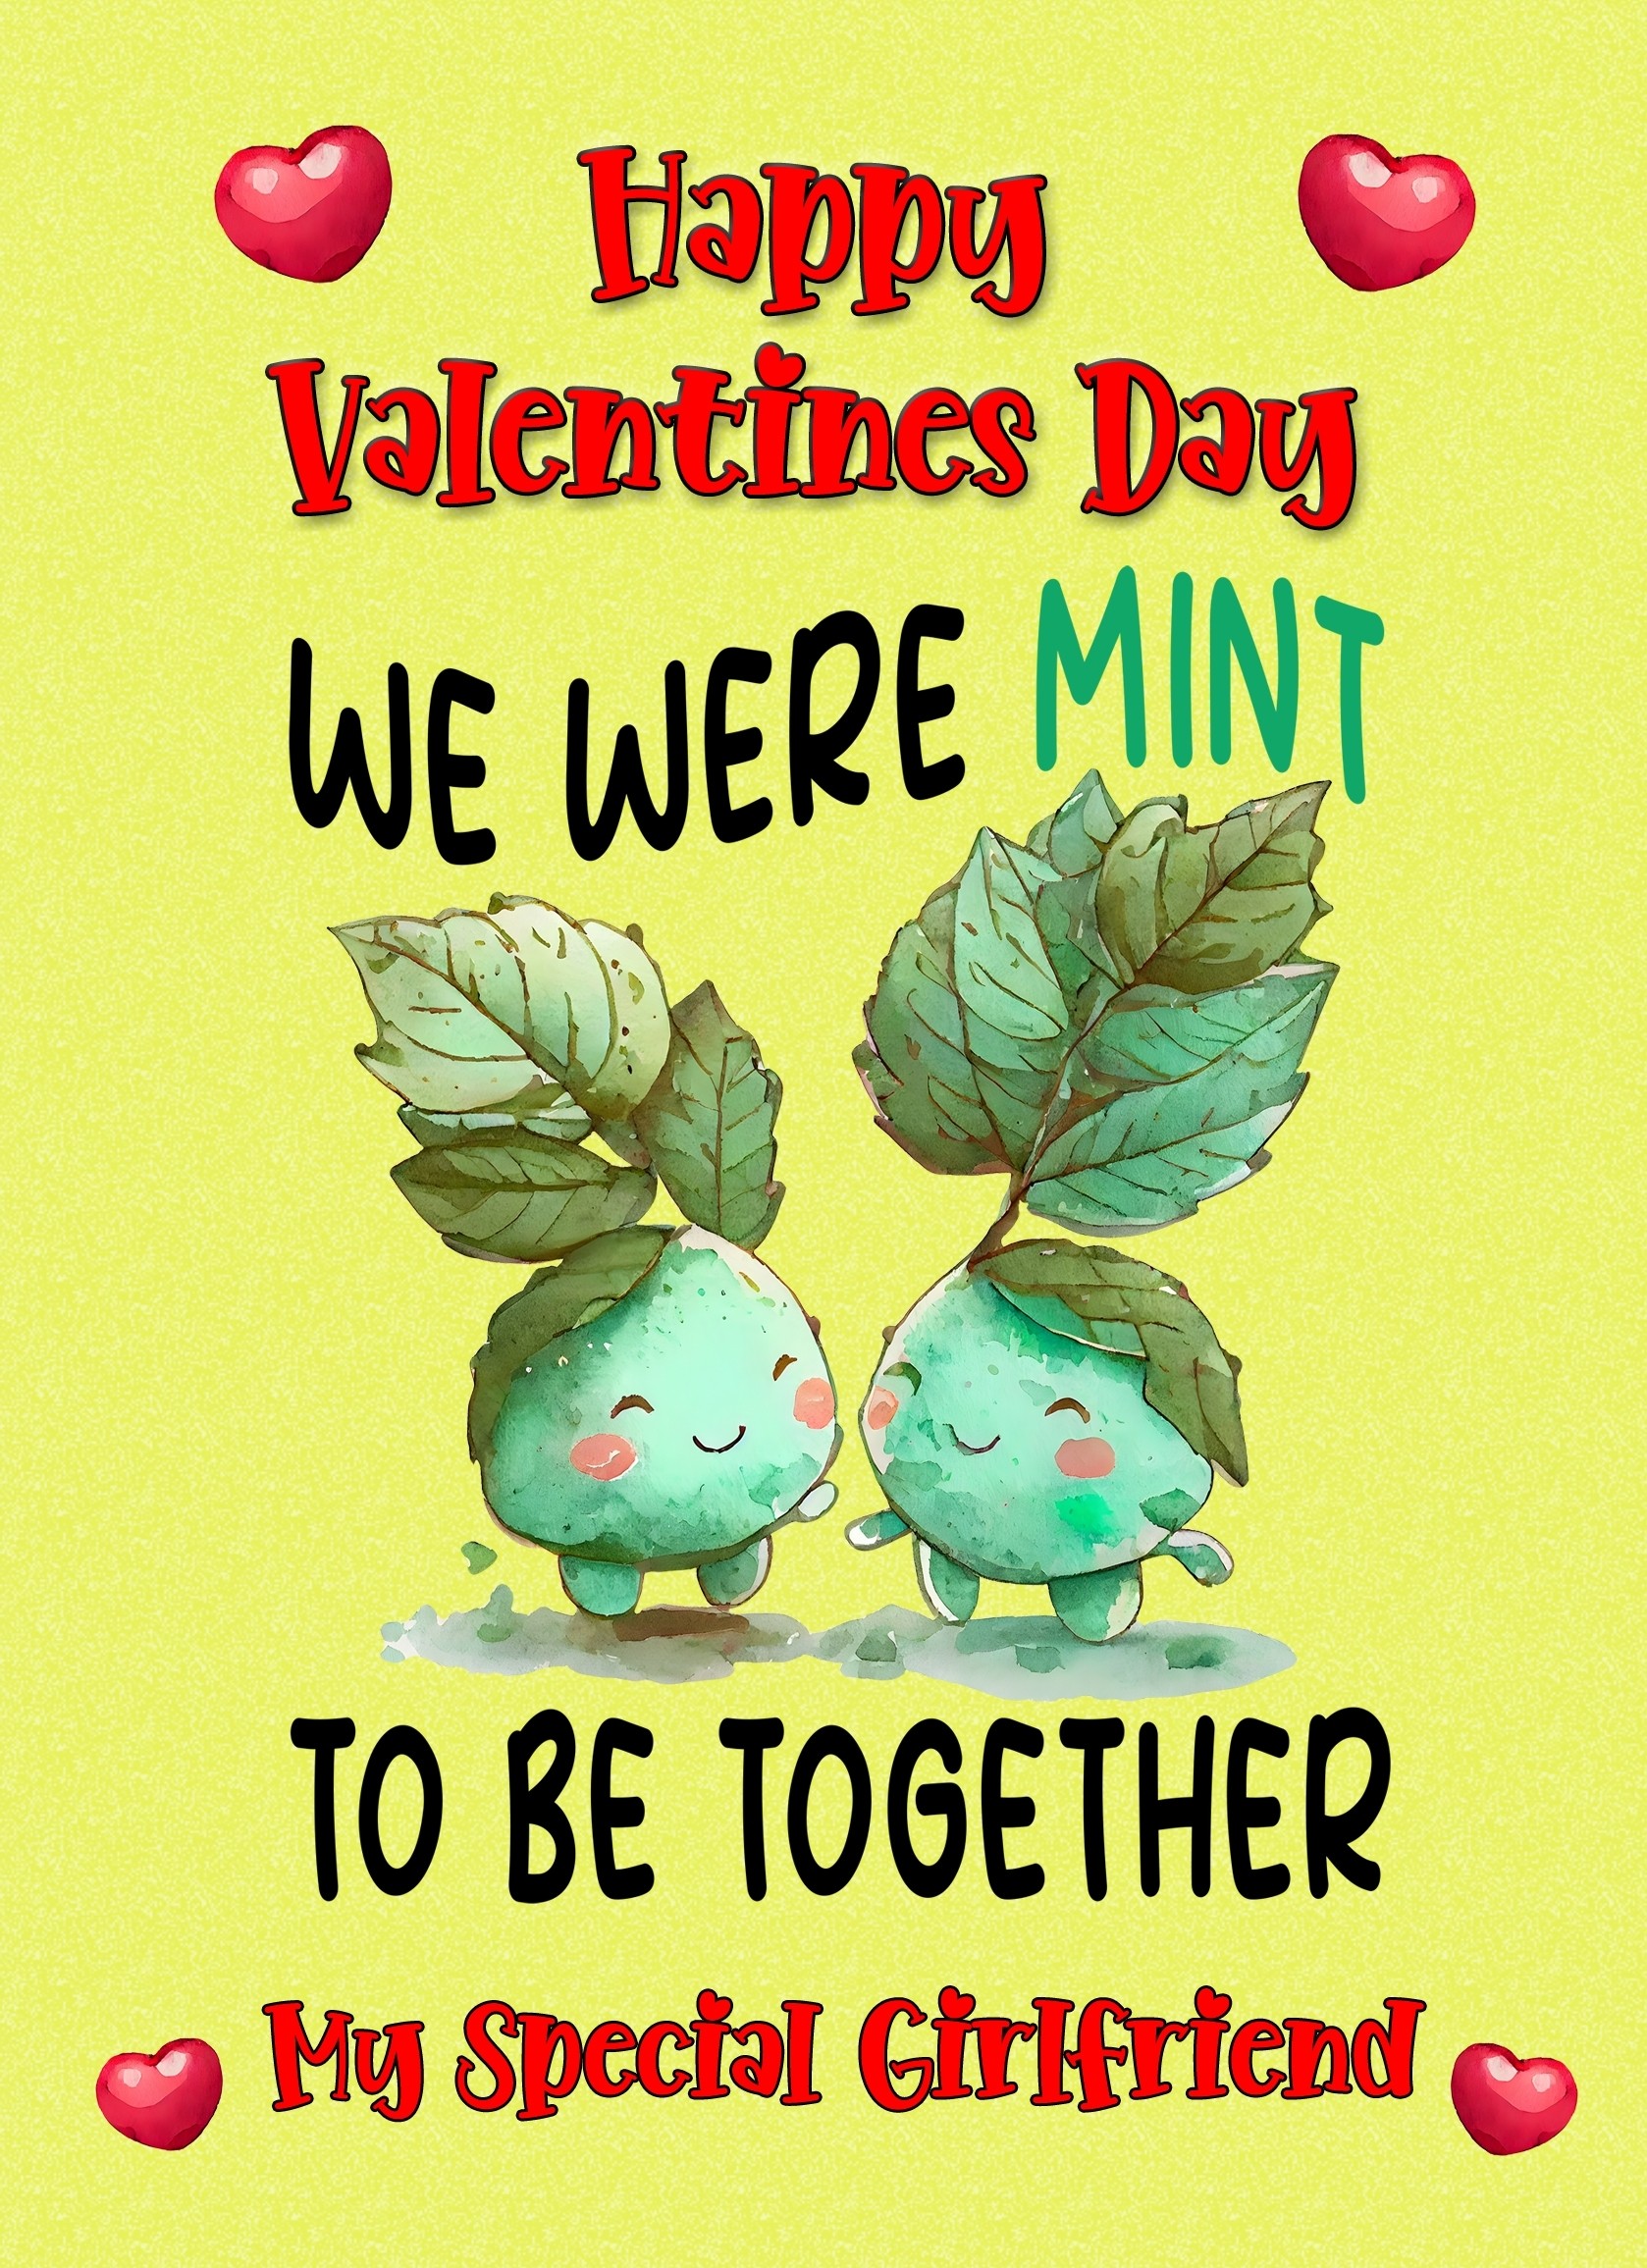 Funny Pun Valentines Day Card for Girlfriend (Mint to Be)